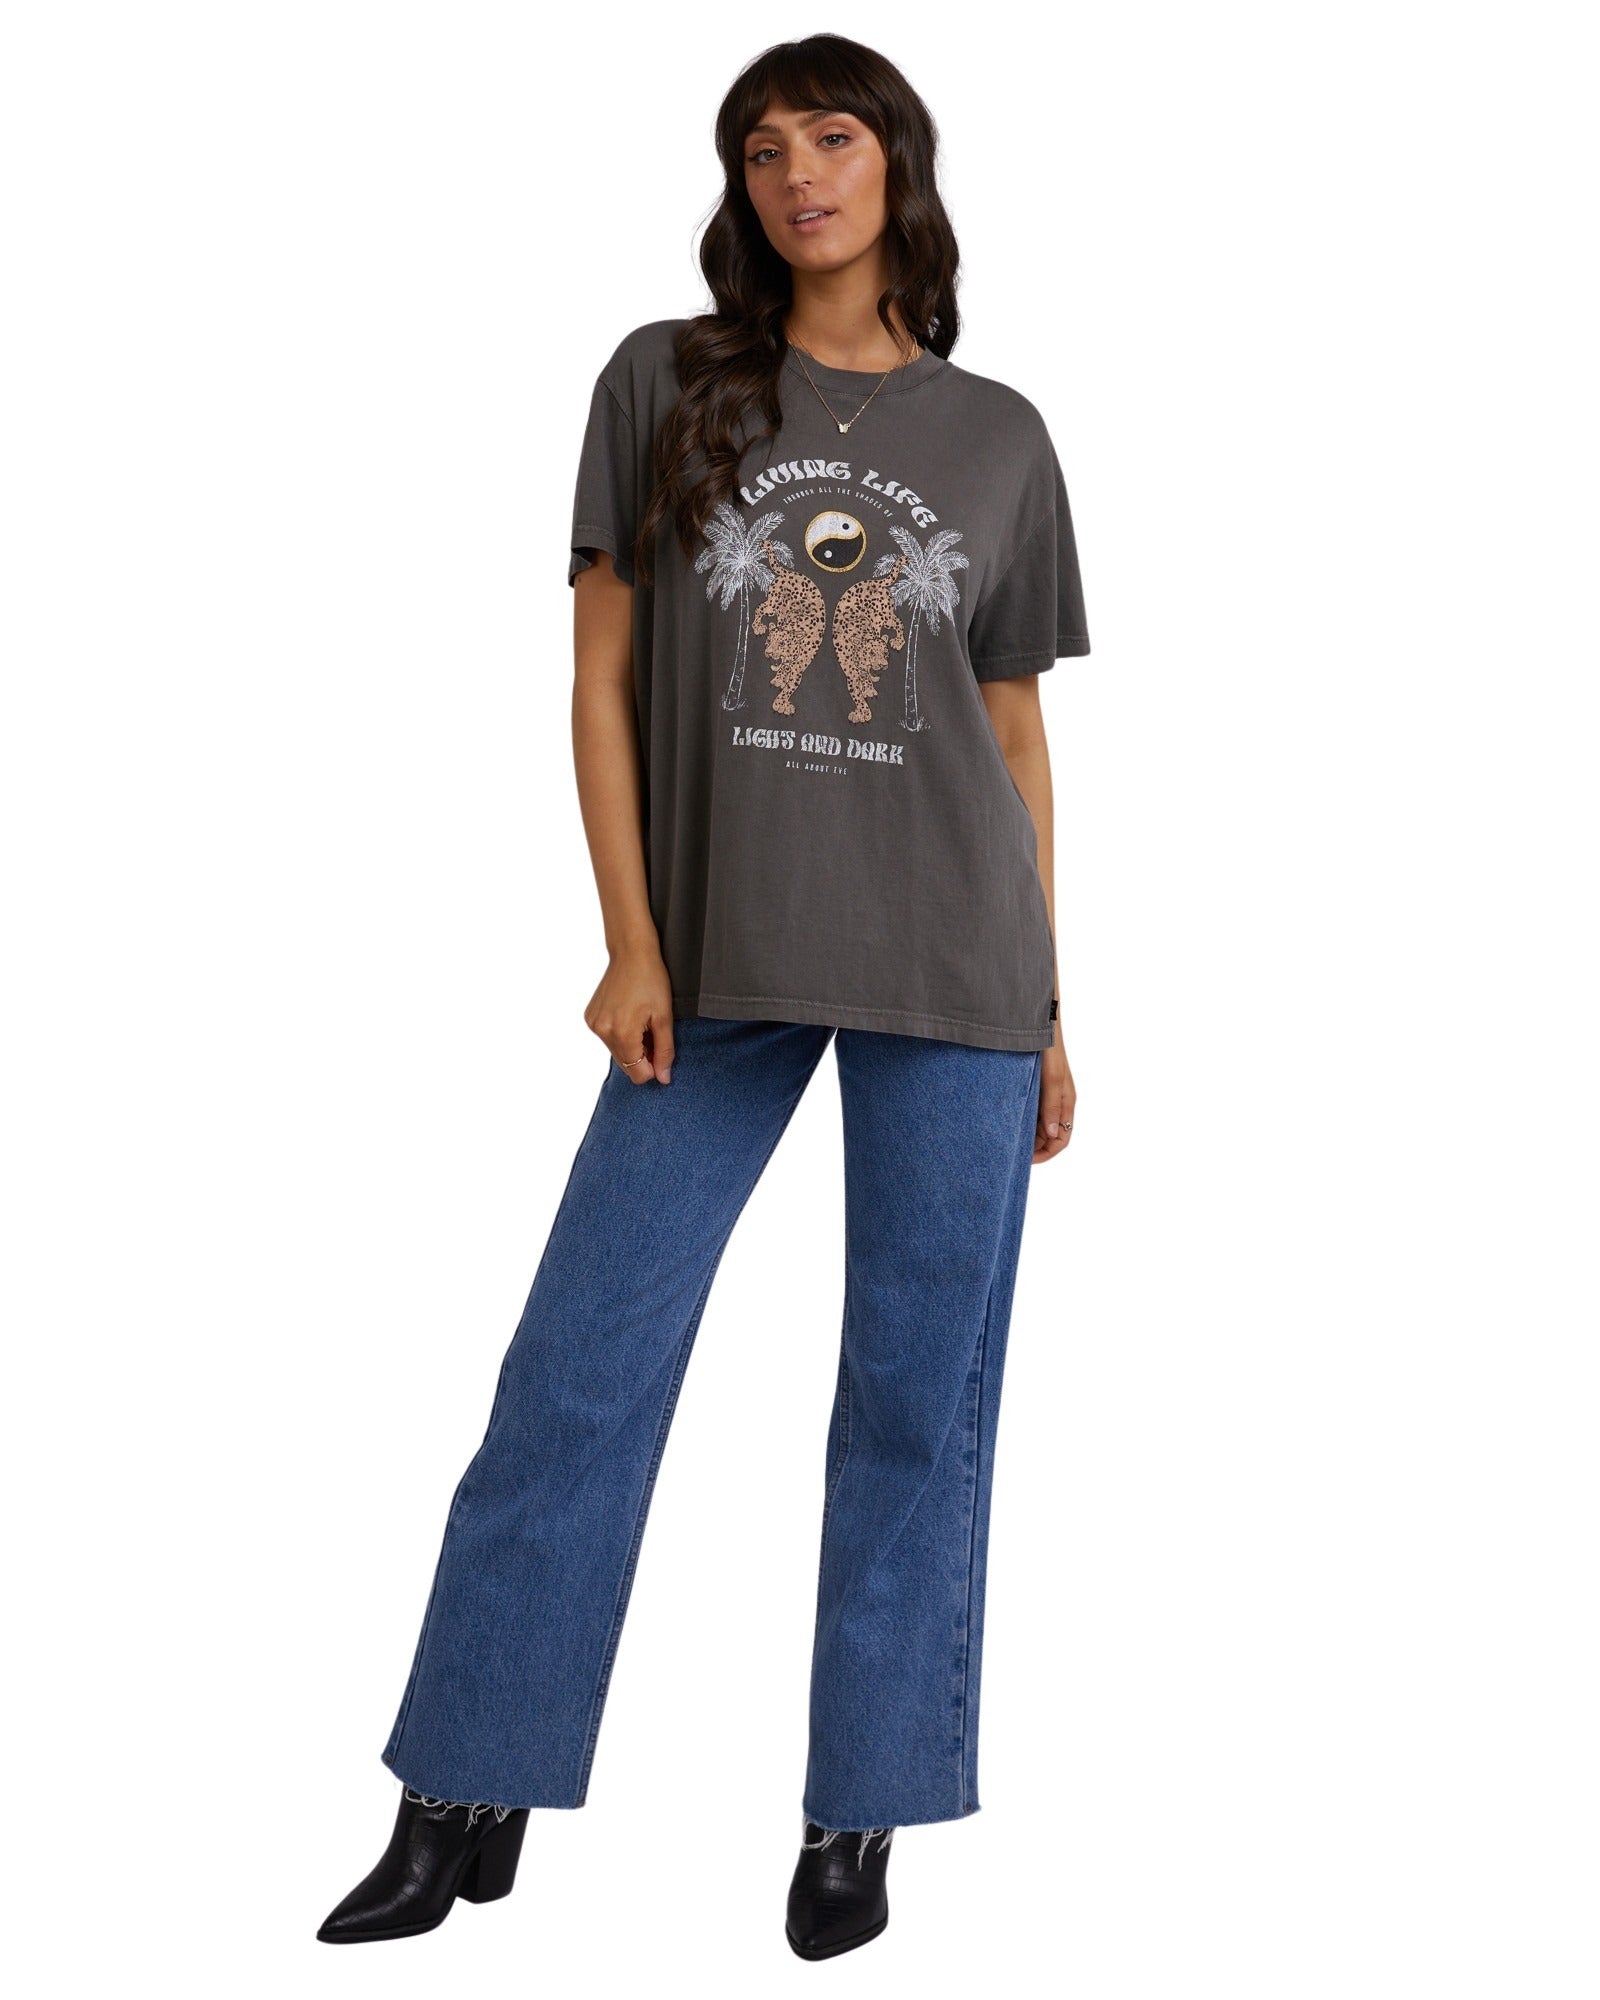 All About Eve - Living Standard Tee - Charcoal